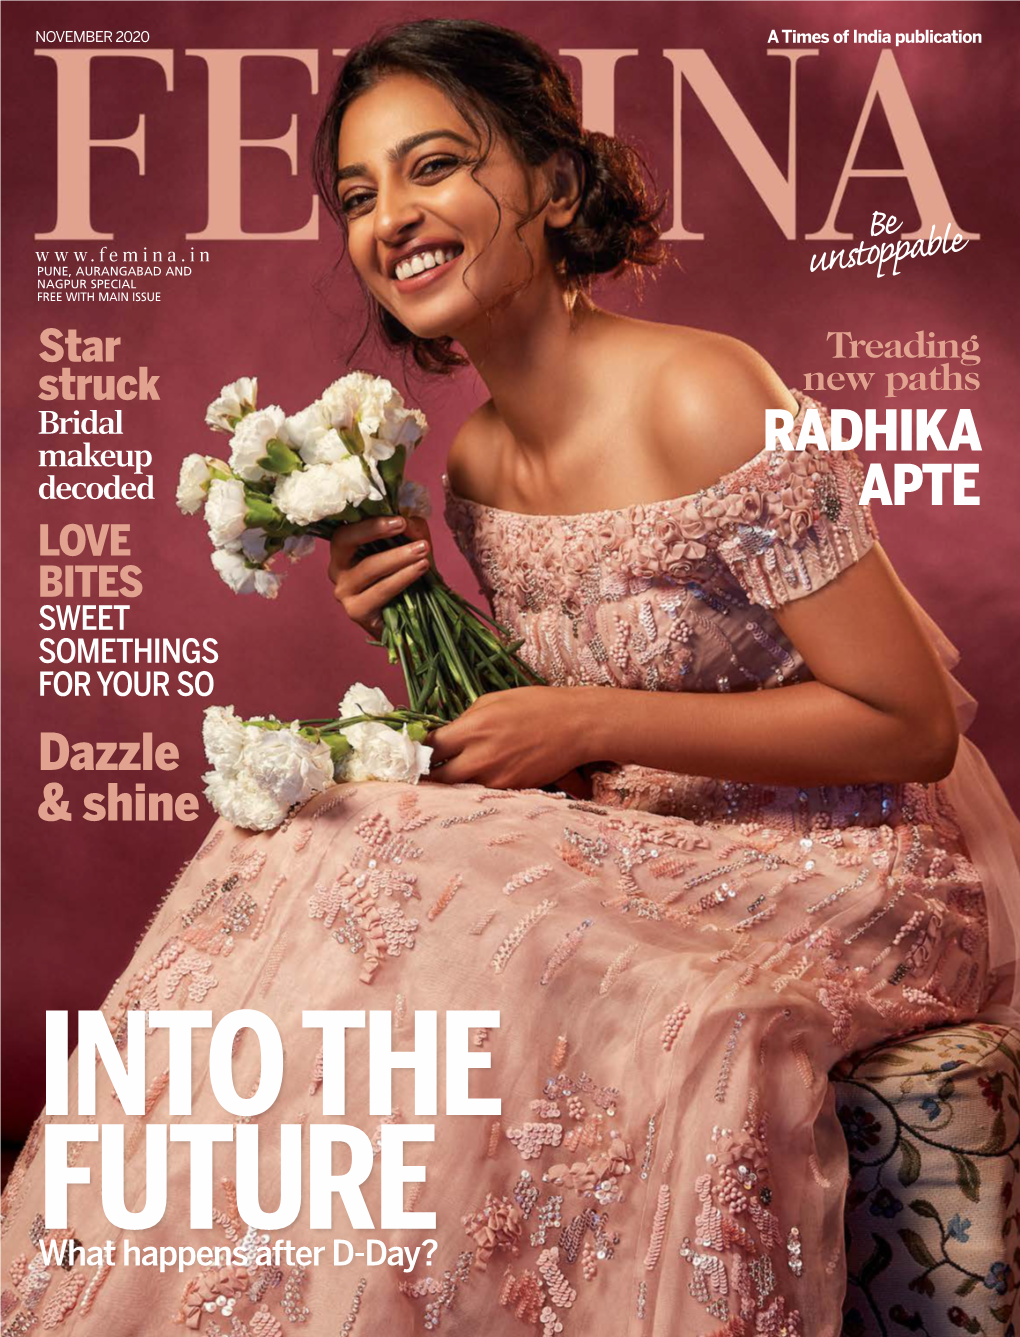 Radhika Apte MANAGER, MARKETING Talks About Her Journey to Date and Her Unusual and Endearing ASHA KULKARNI Wedding Ceremony in the Reality Pages